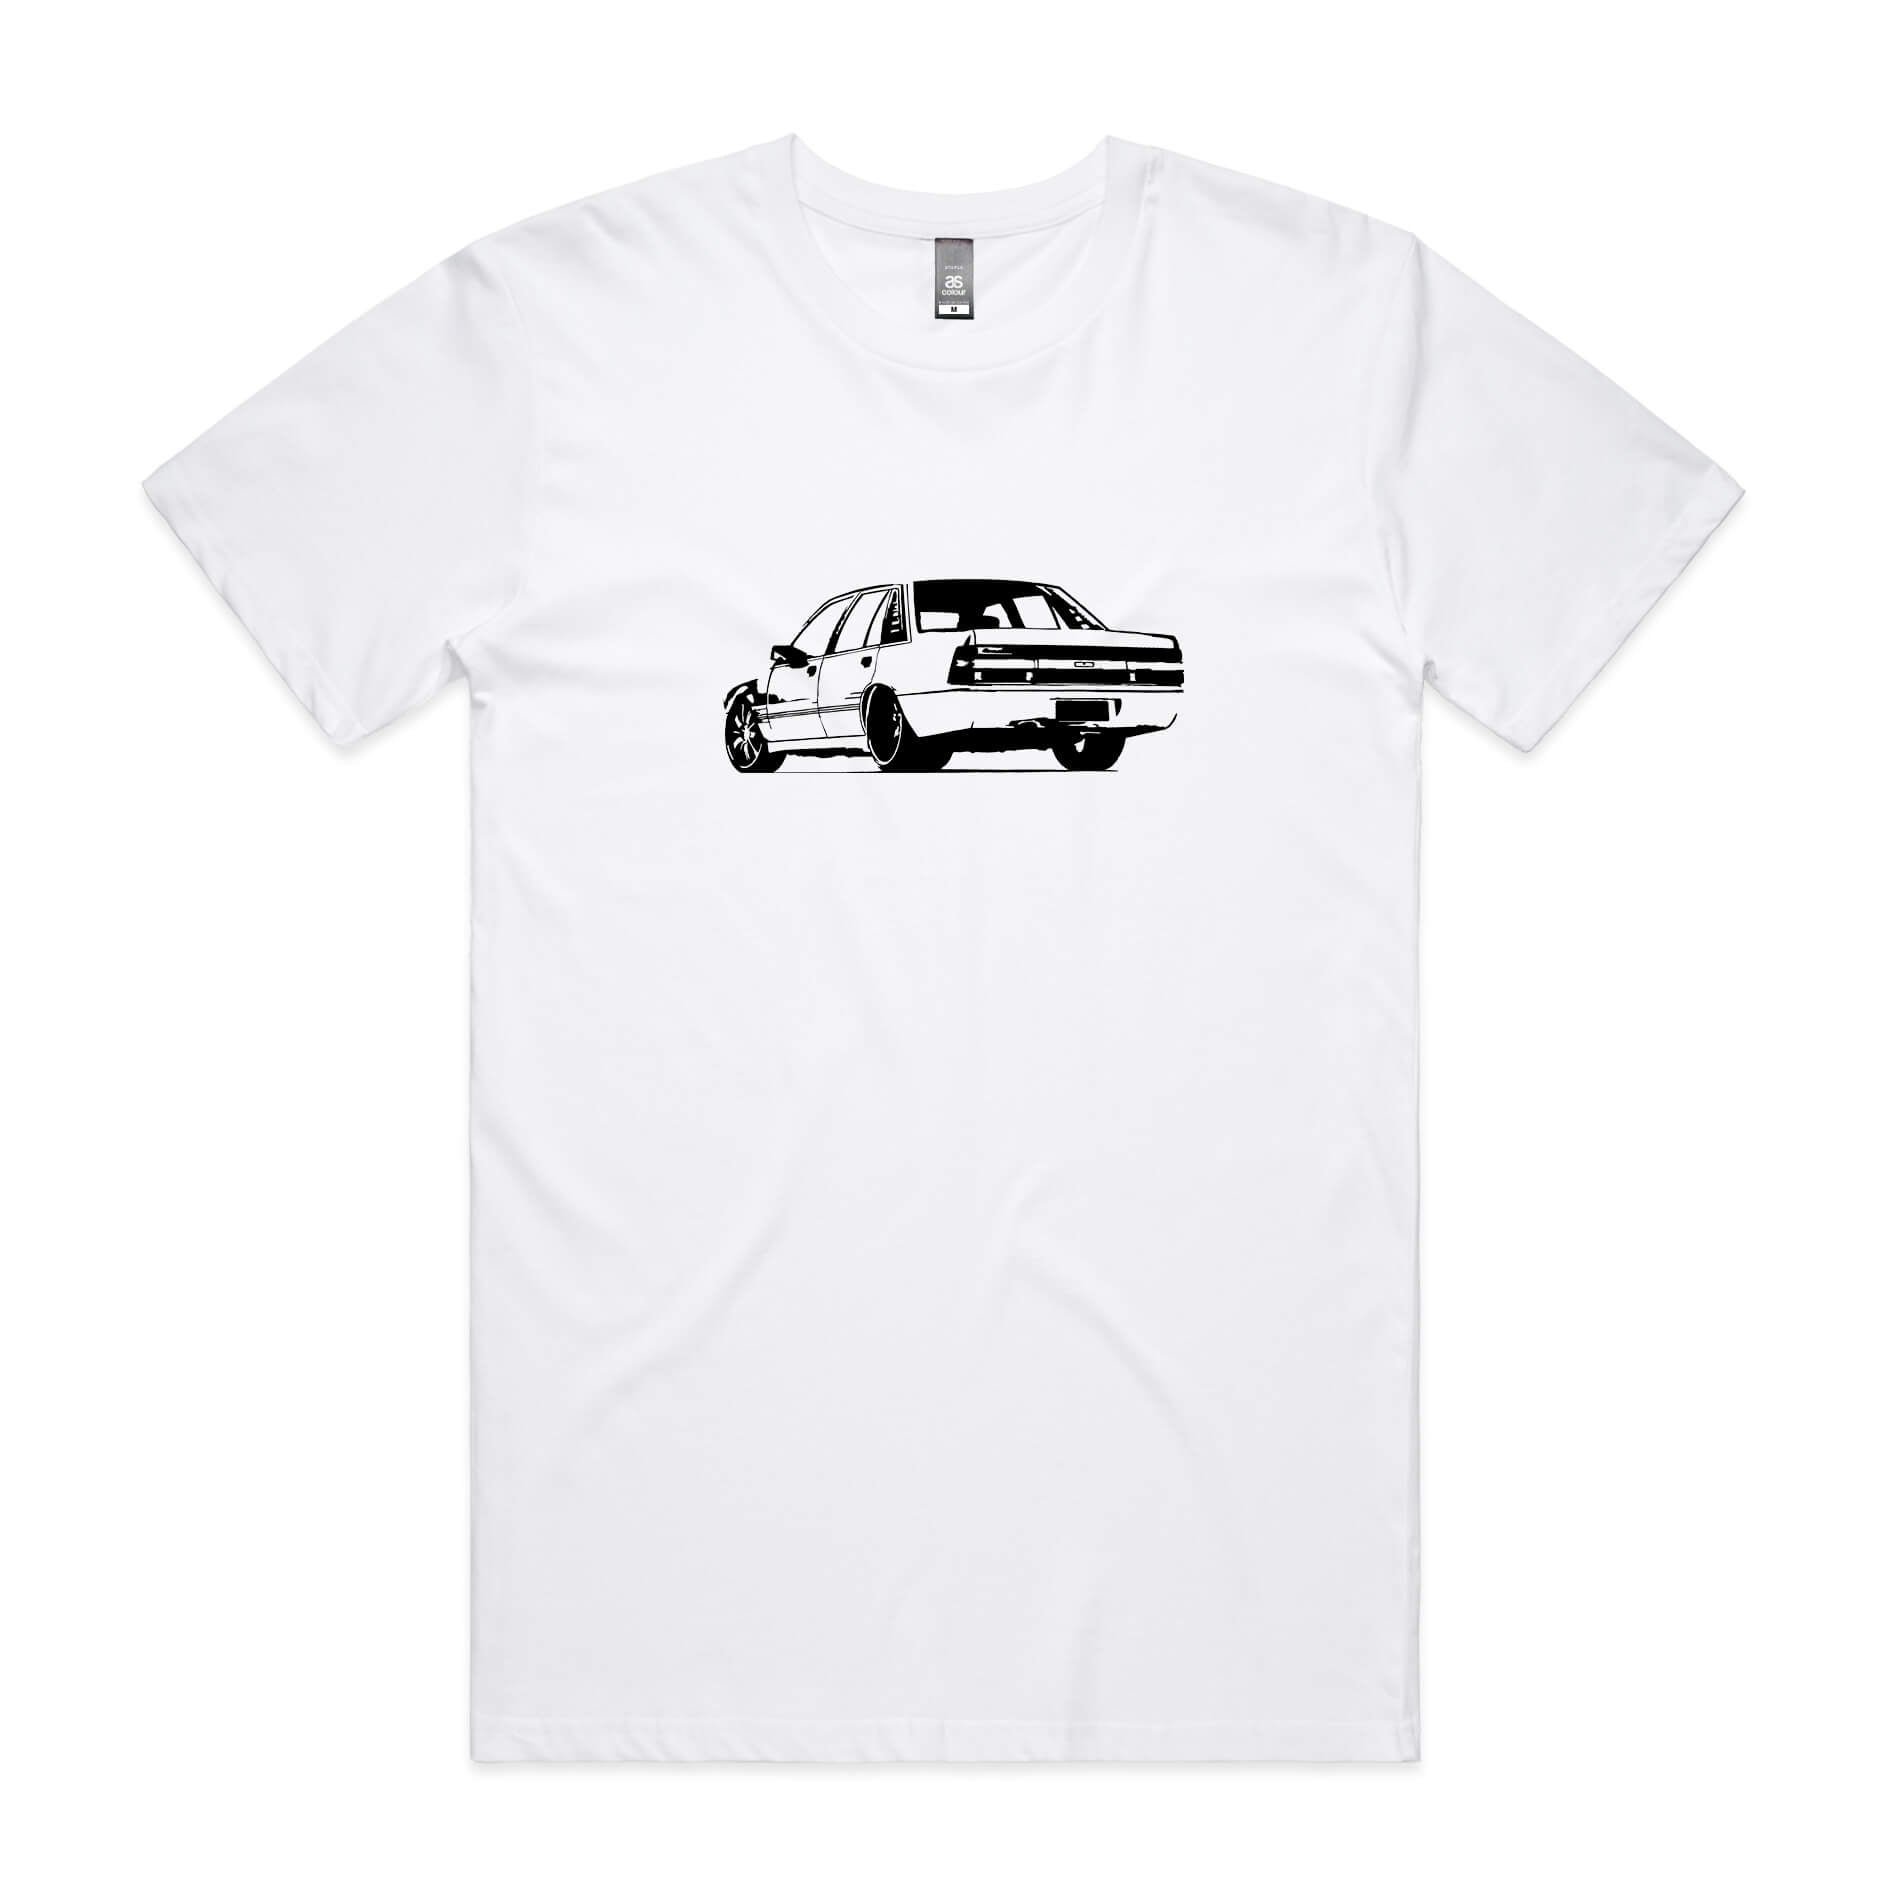 Holden VL Calais t-shirt in white with black Commodore car graphic